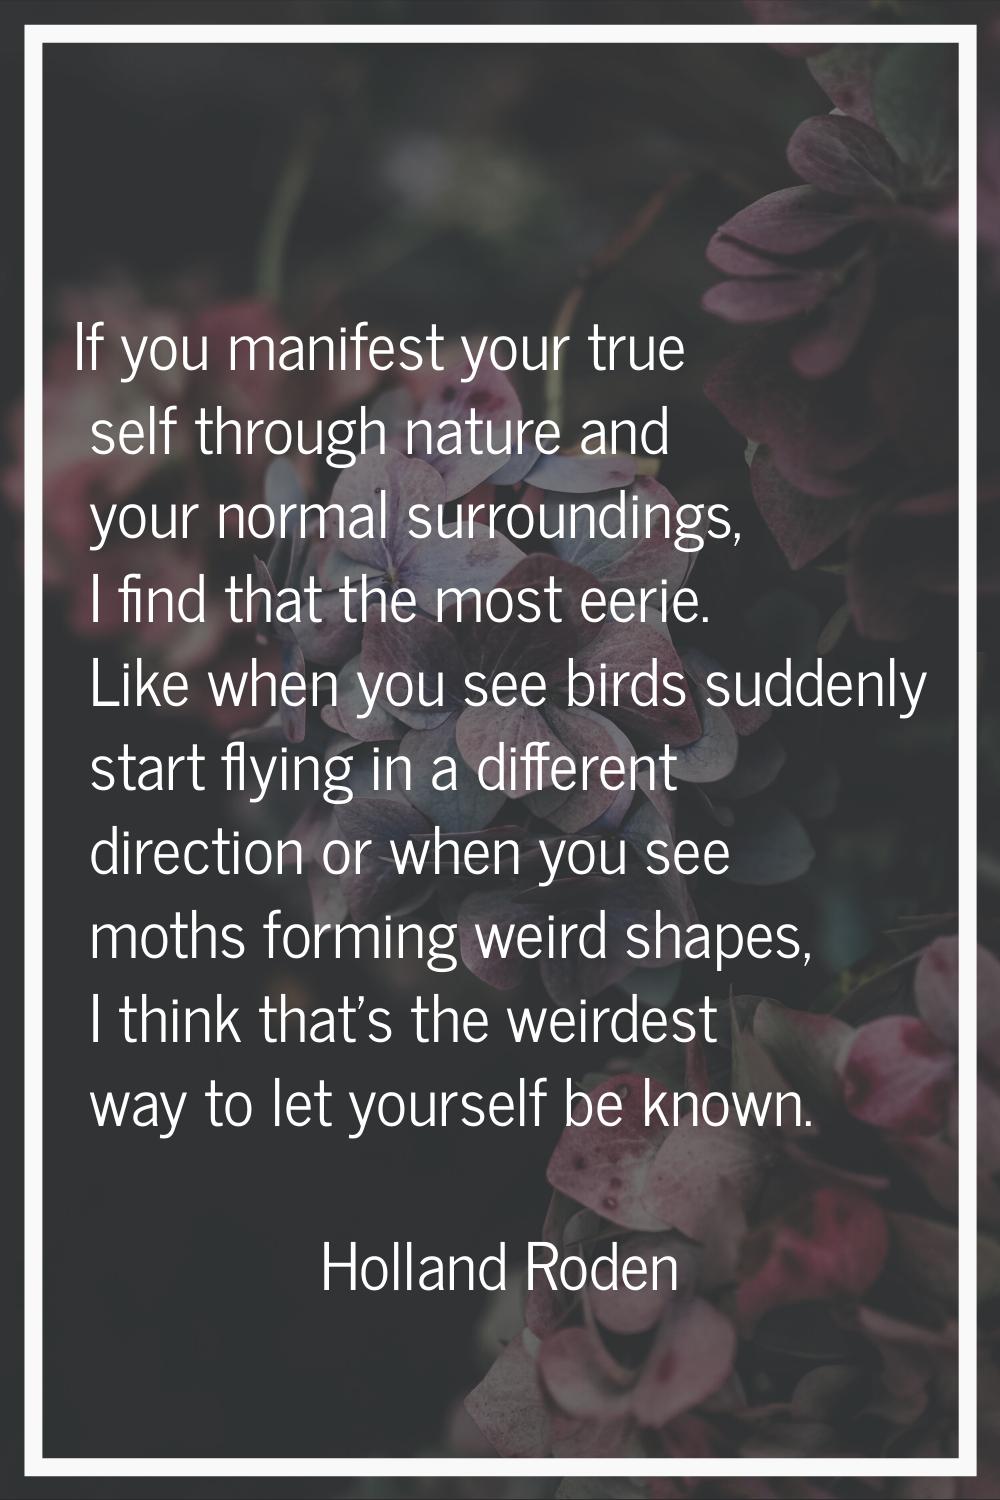 If you manifest your true self through nature and your normal surroundings, I find that the most ee